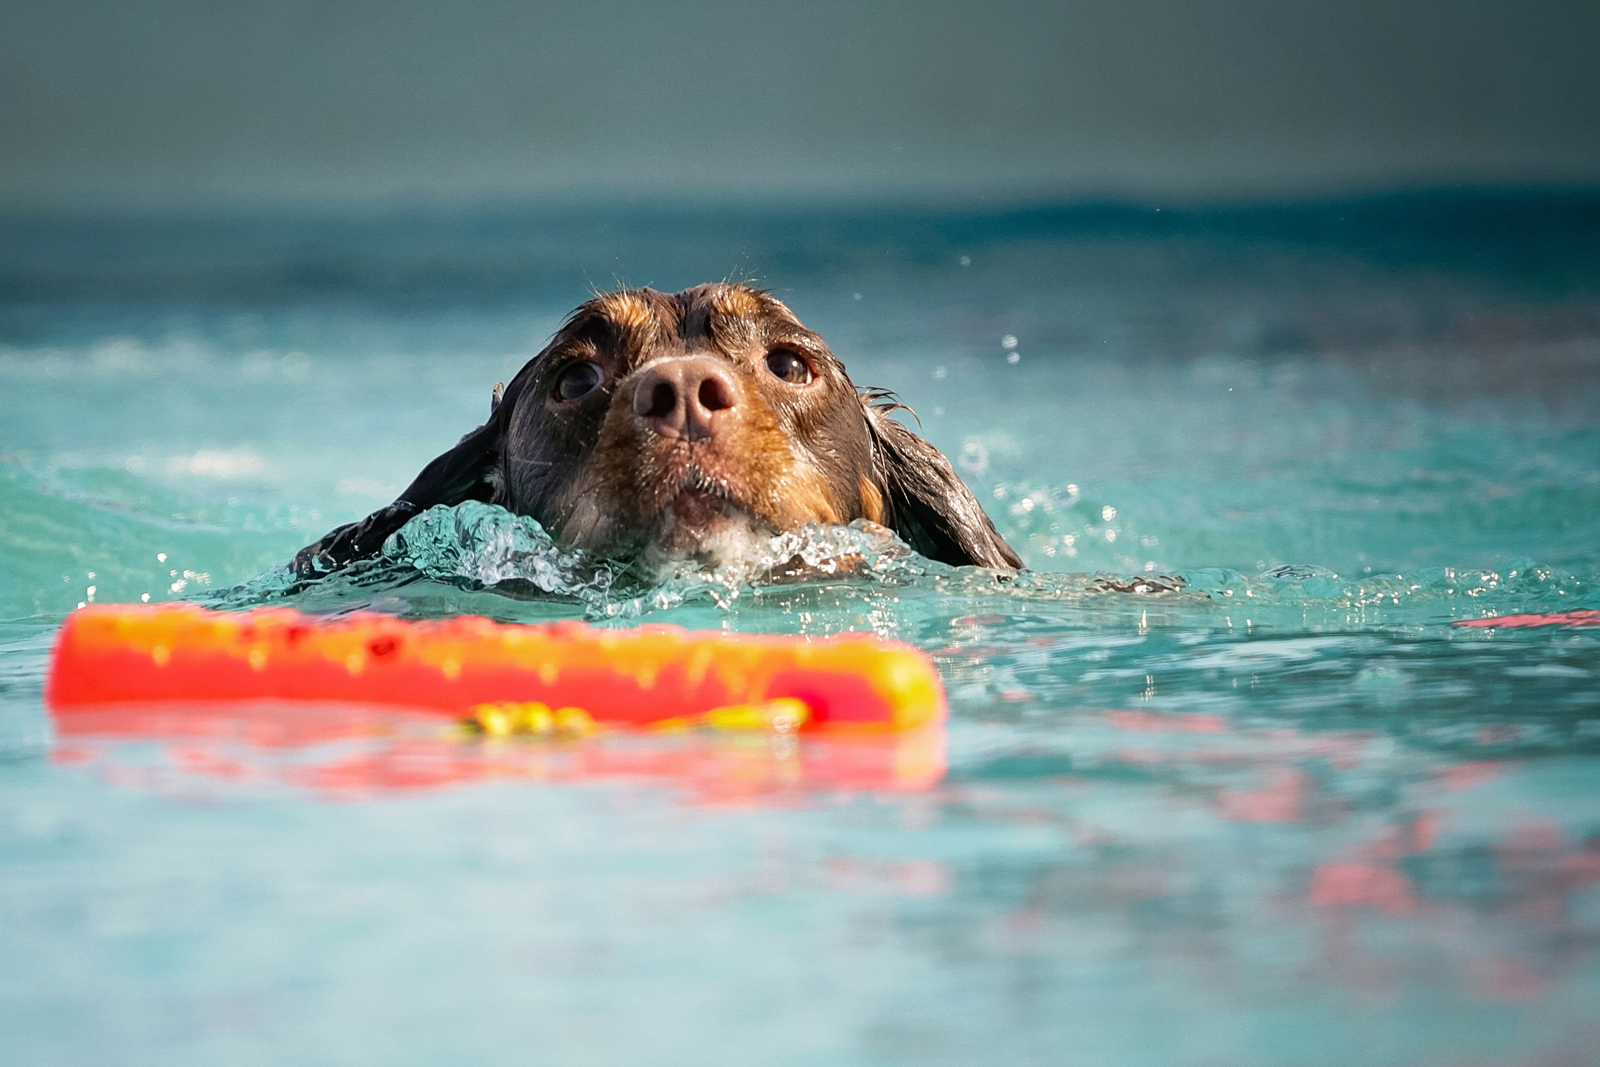 A dog swimming and retrieving a toy from a pool